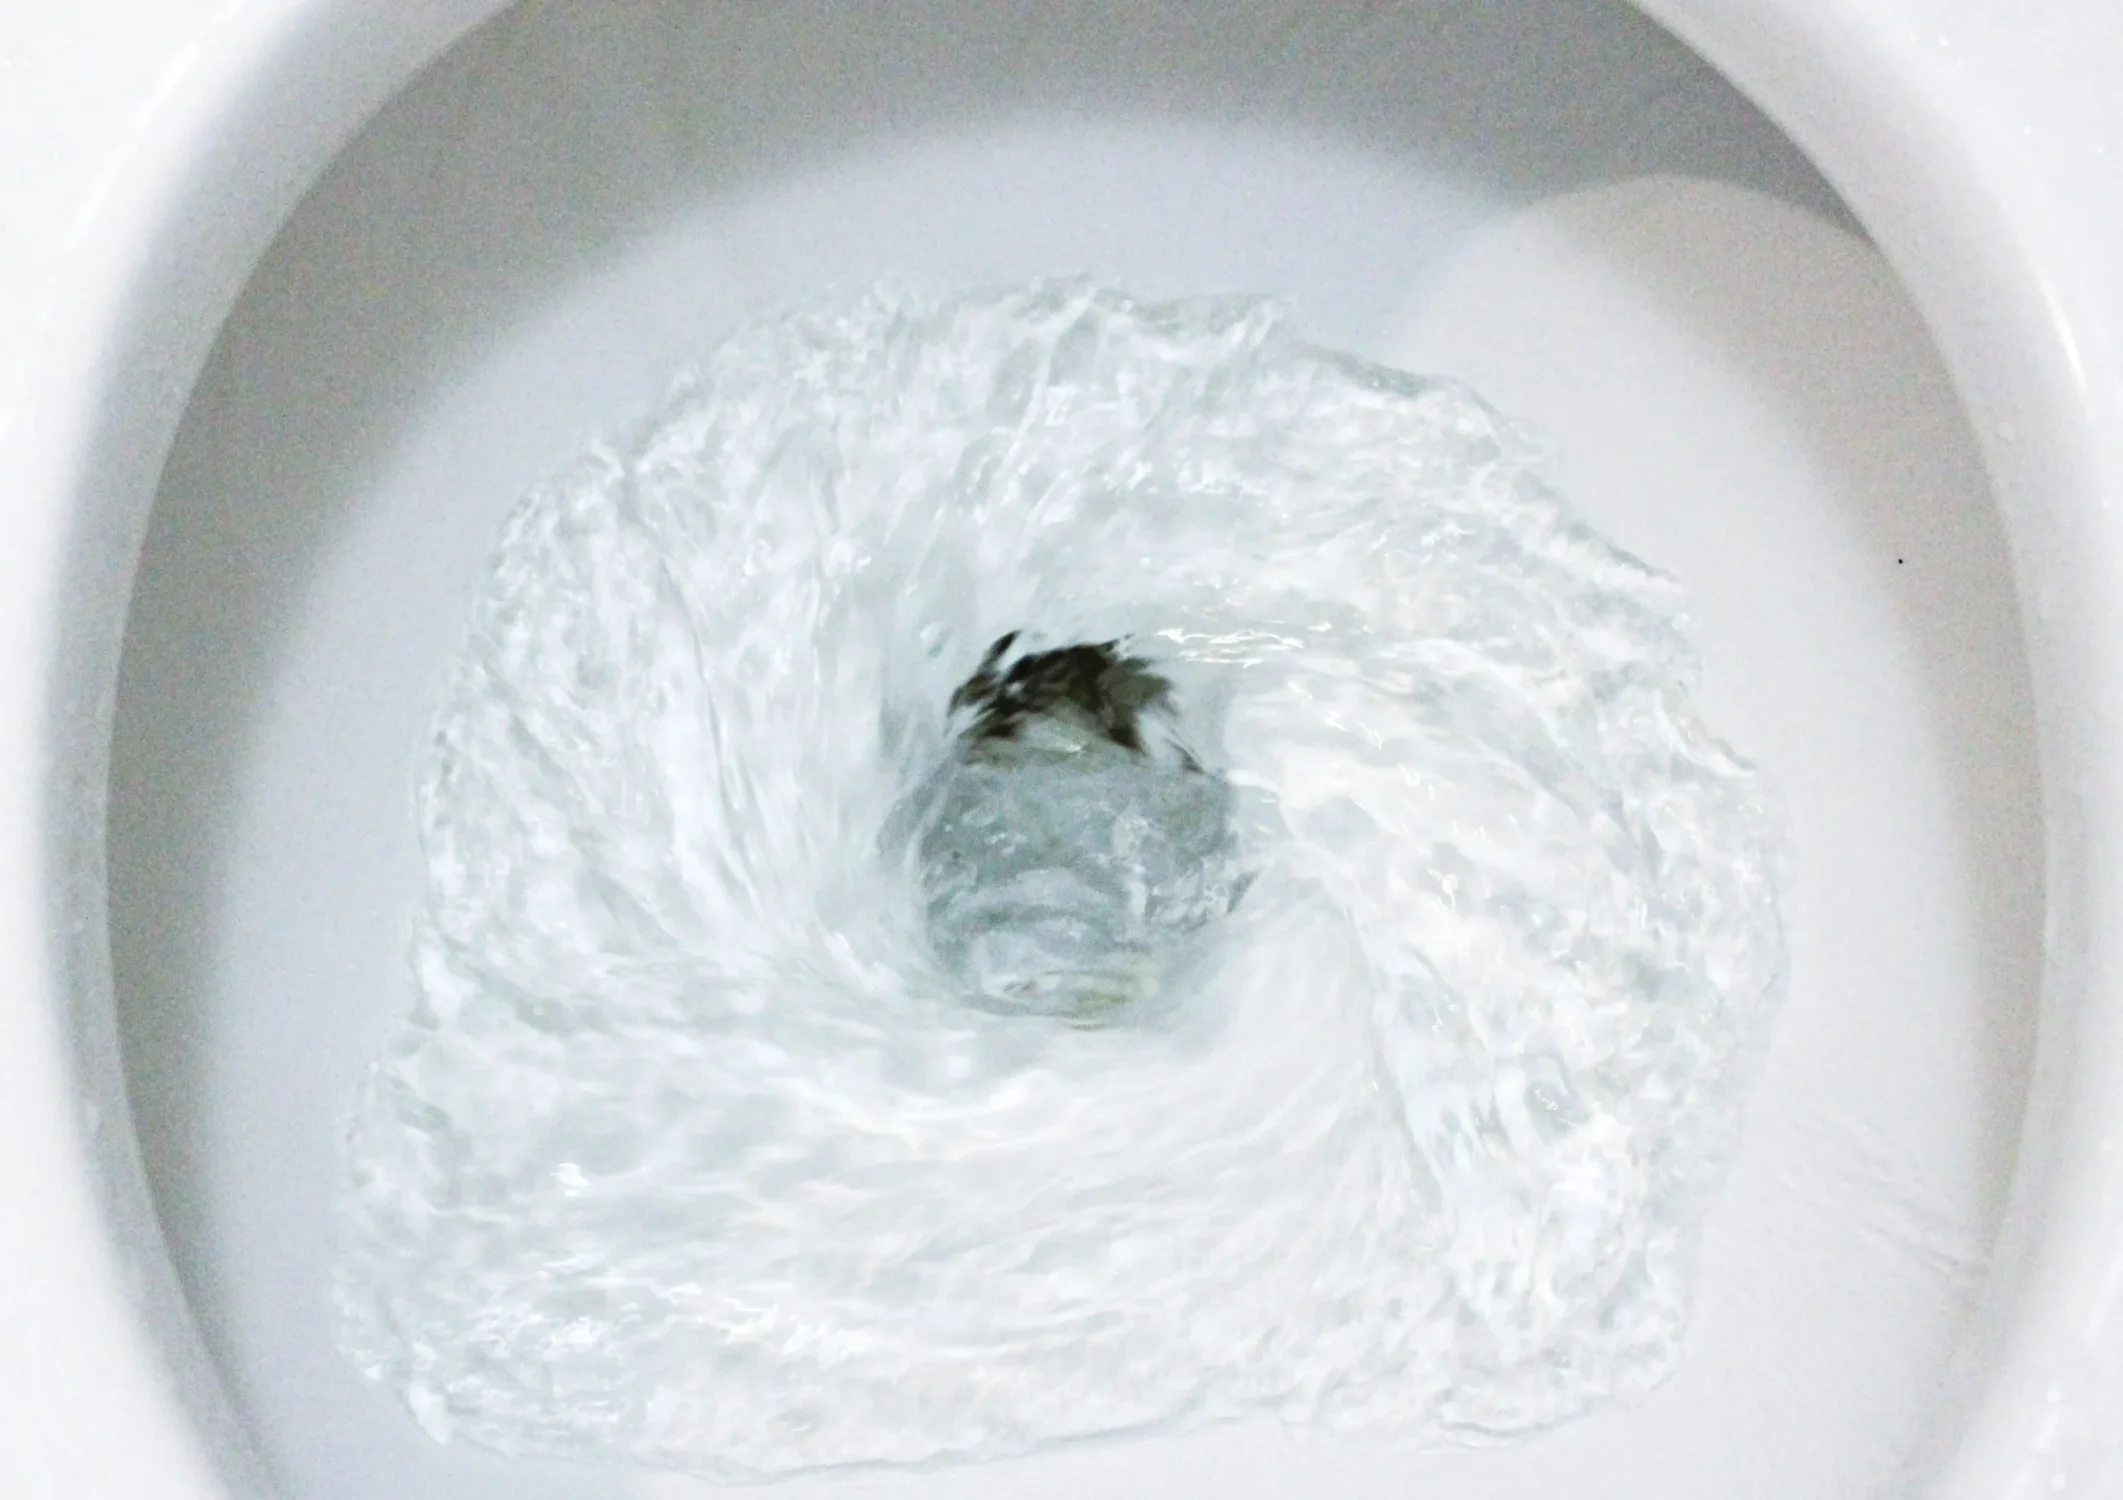 Toilet making noise after flushing